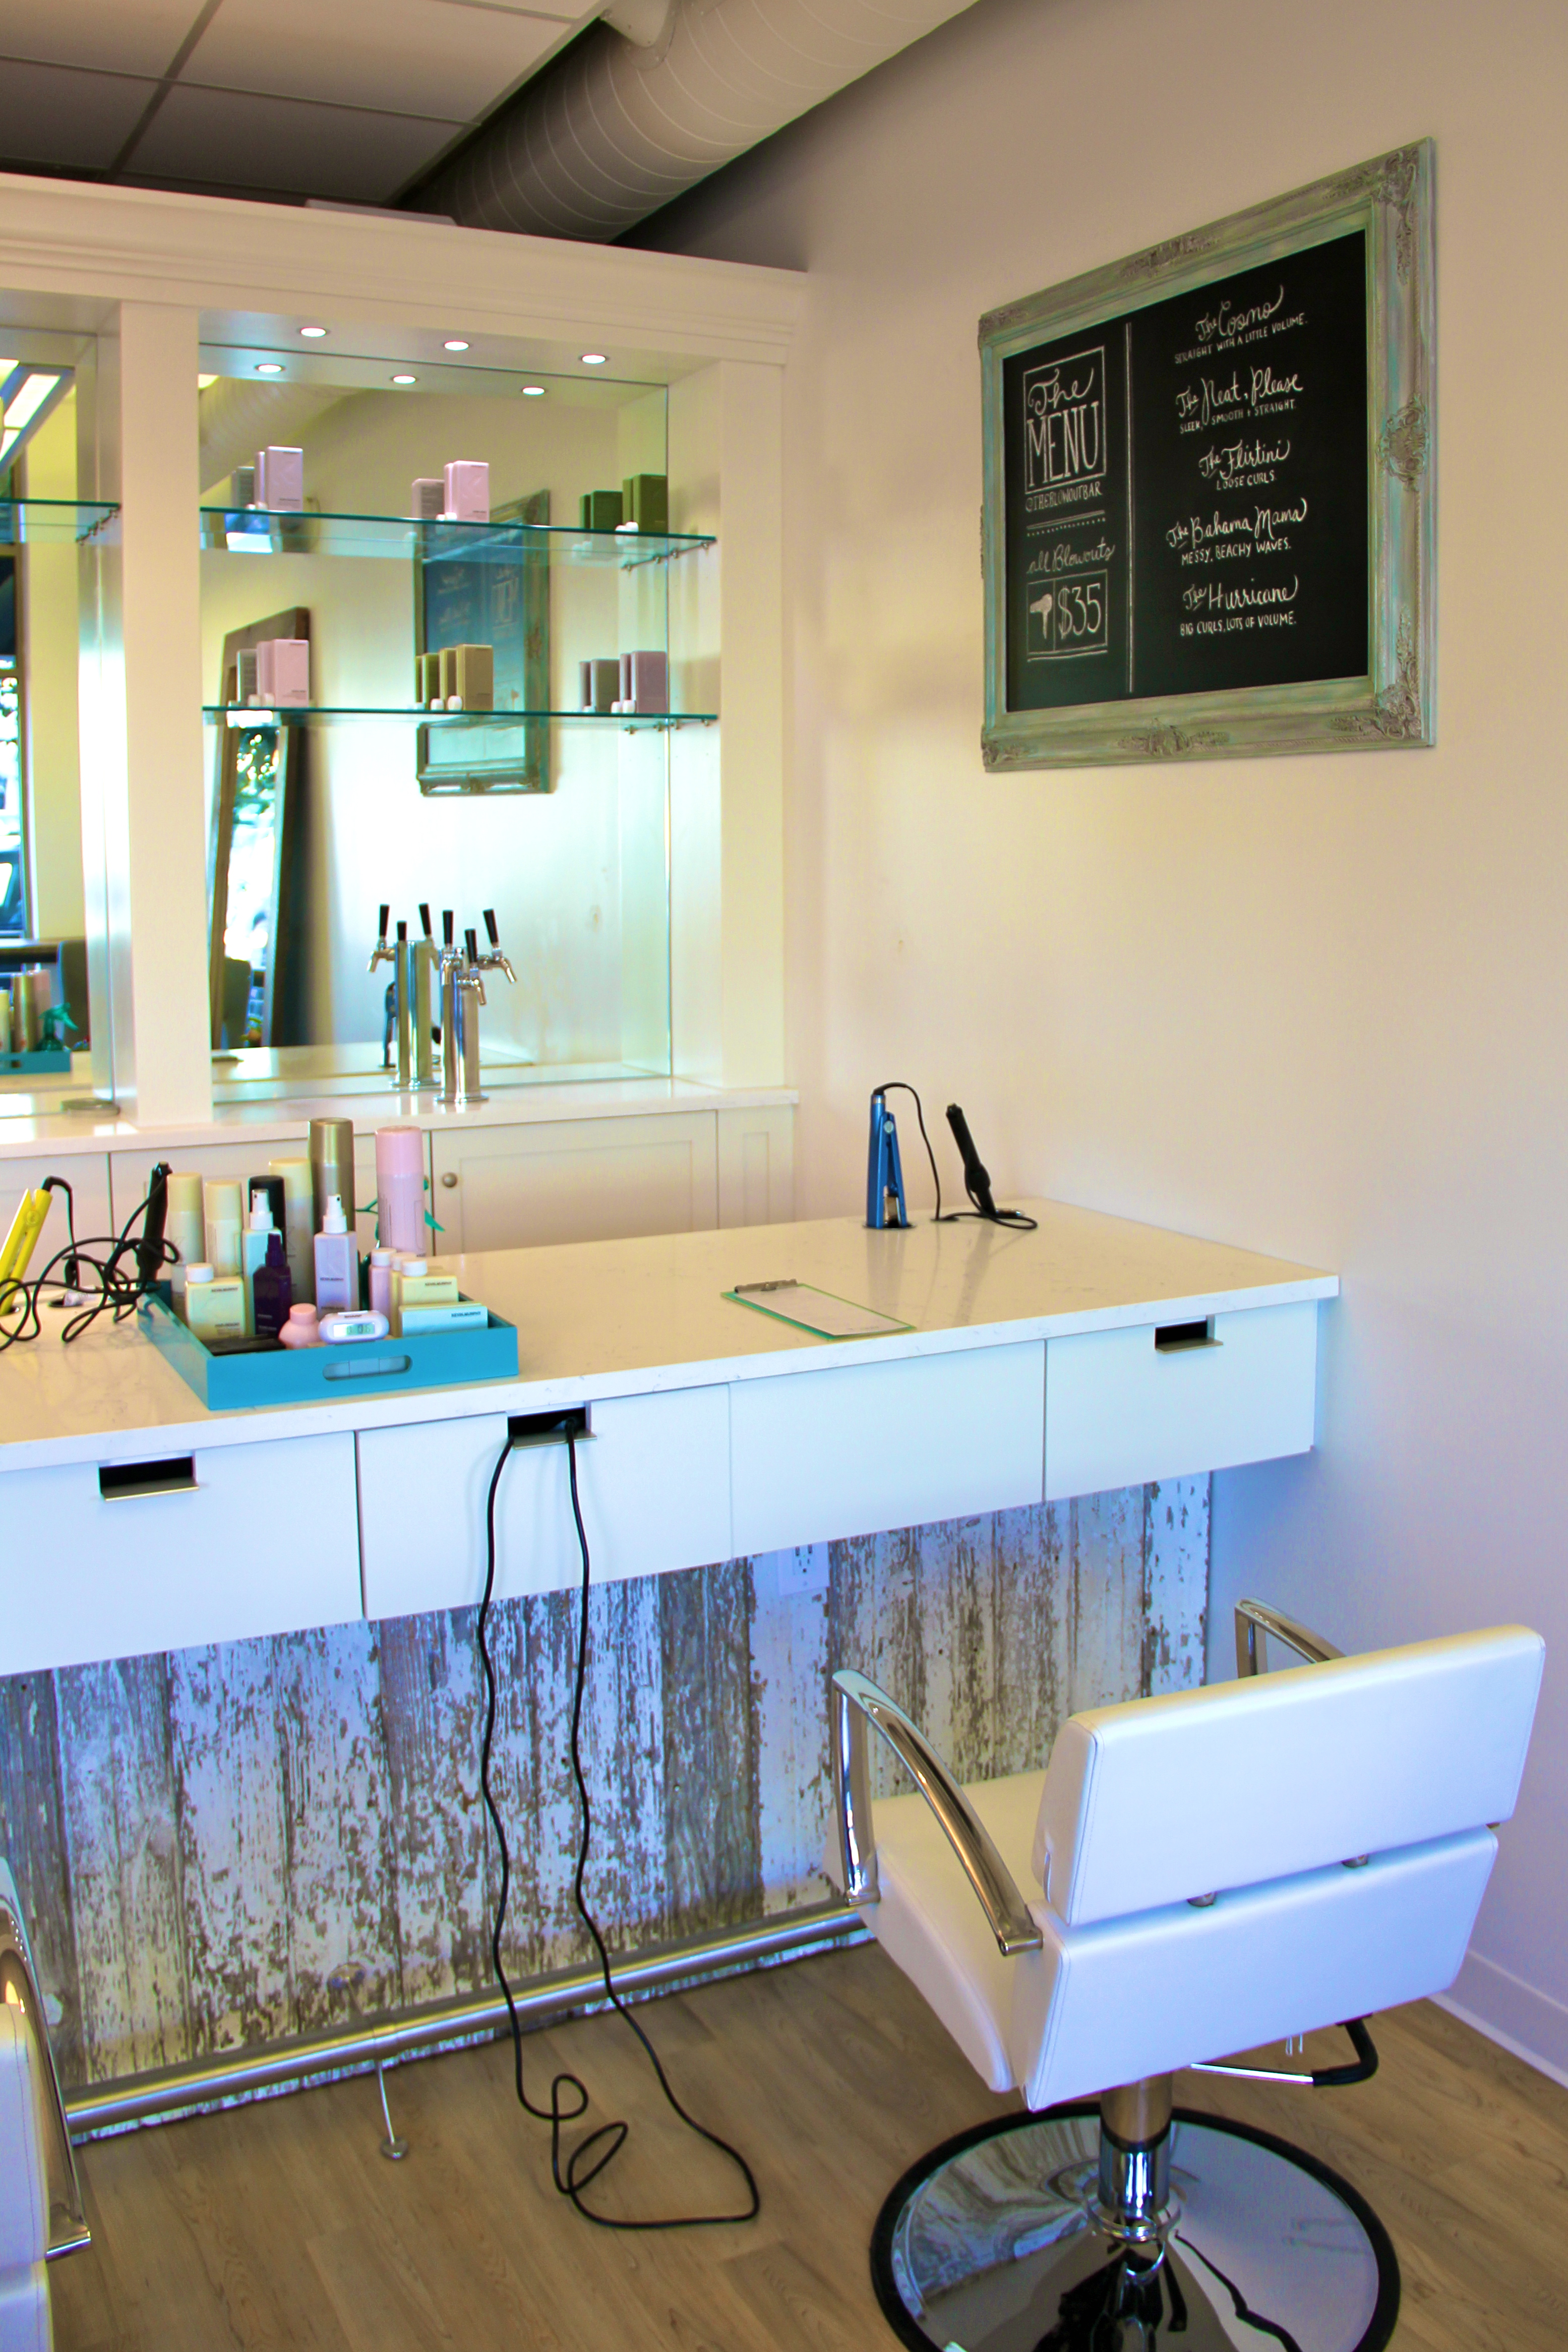 The Blowout Bar | girl about columbus